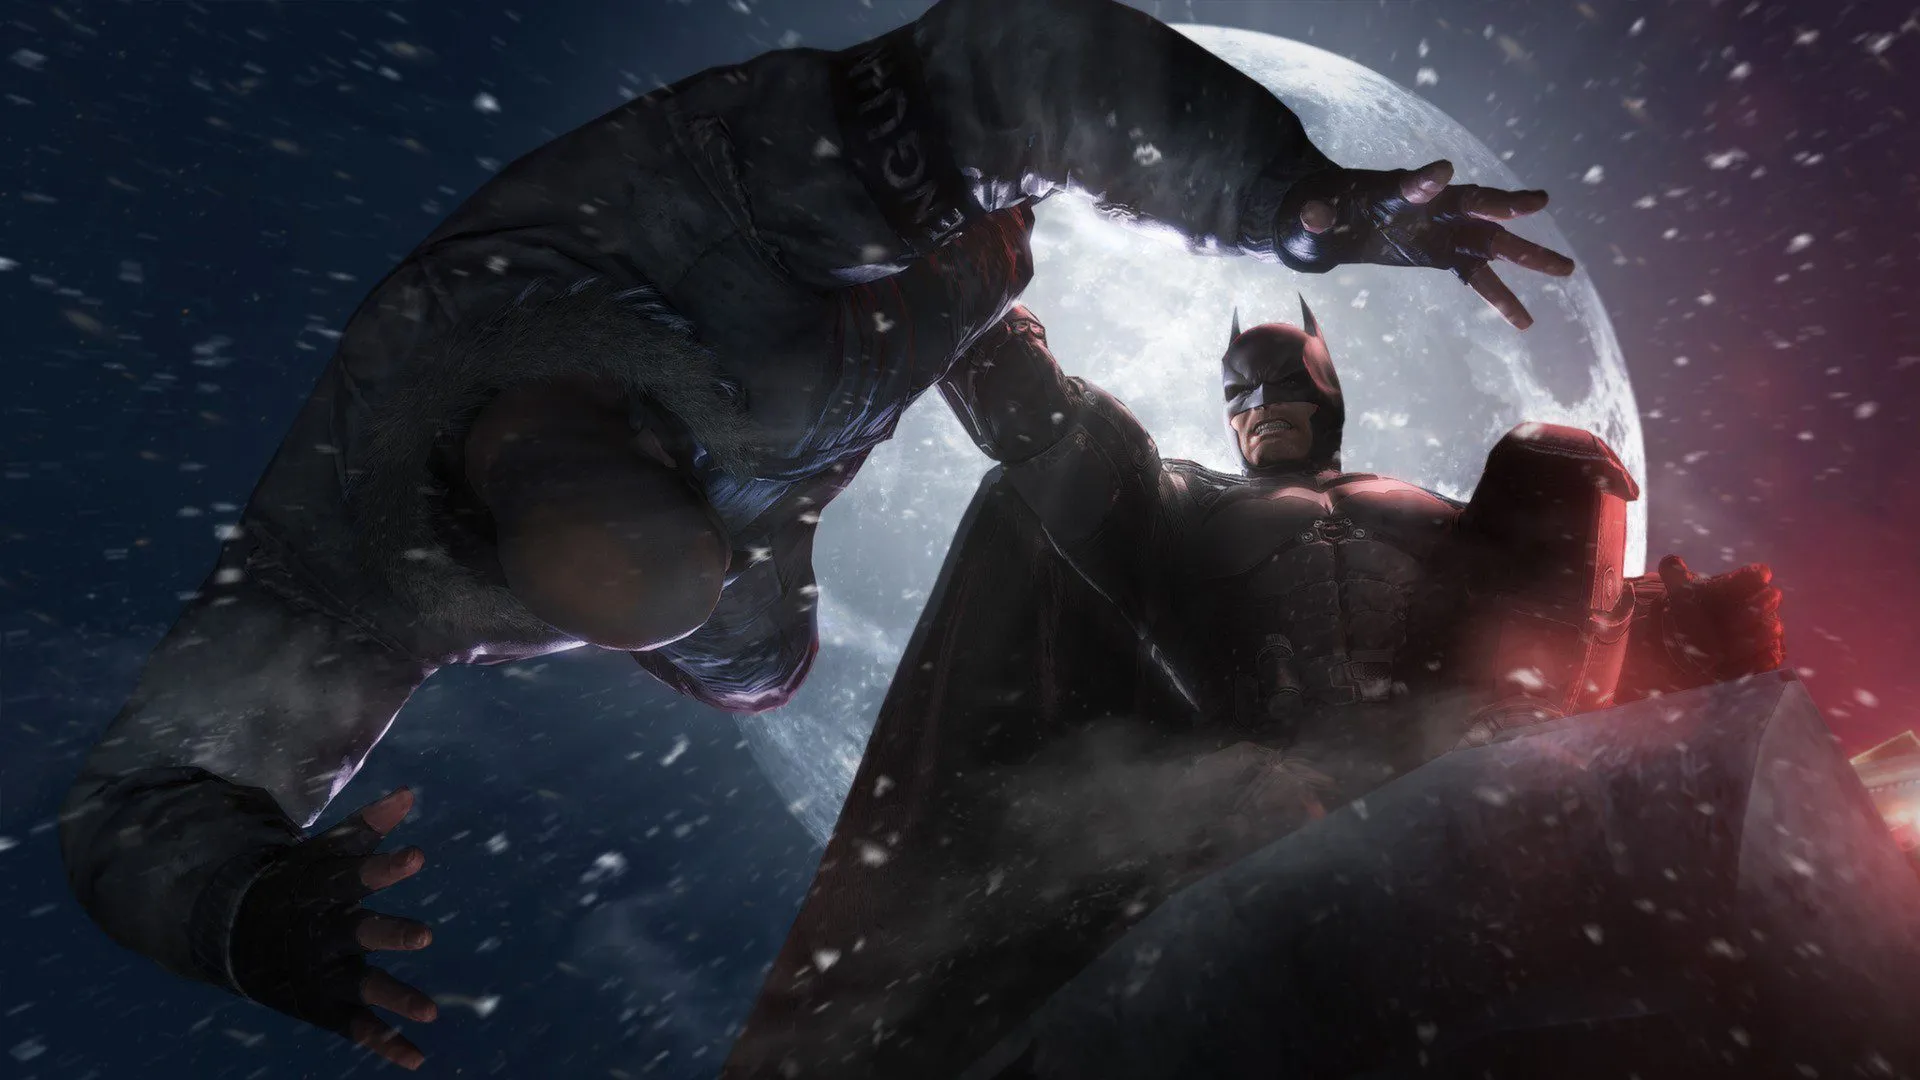 Batman: Arkham Origins is flawed, but it's one of the few Christmas games